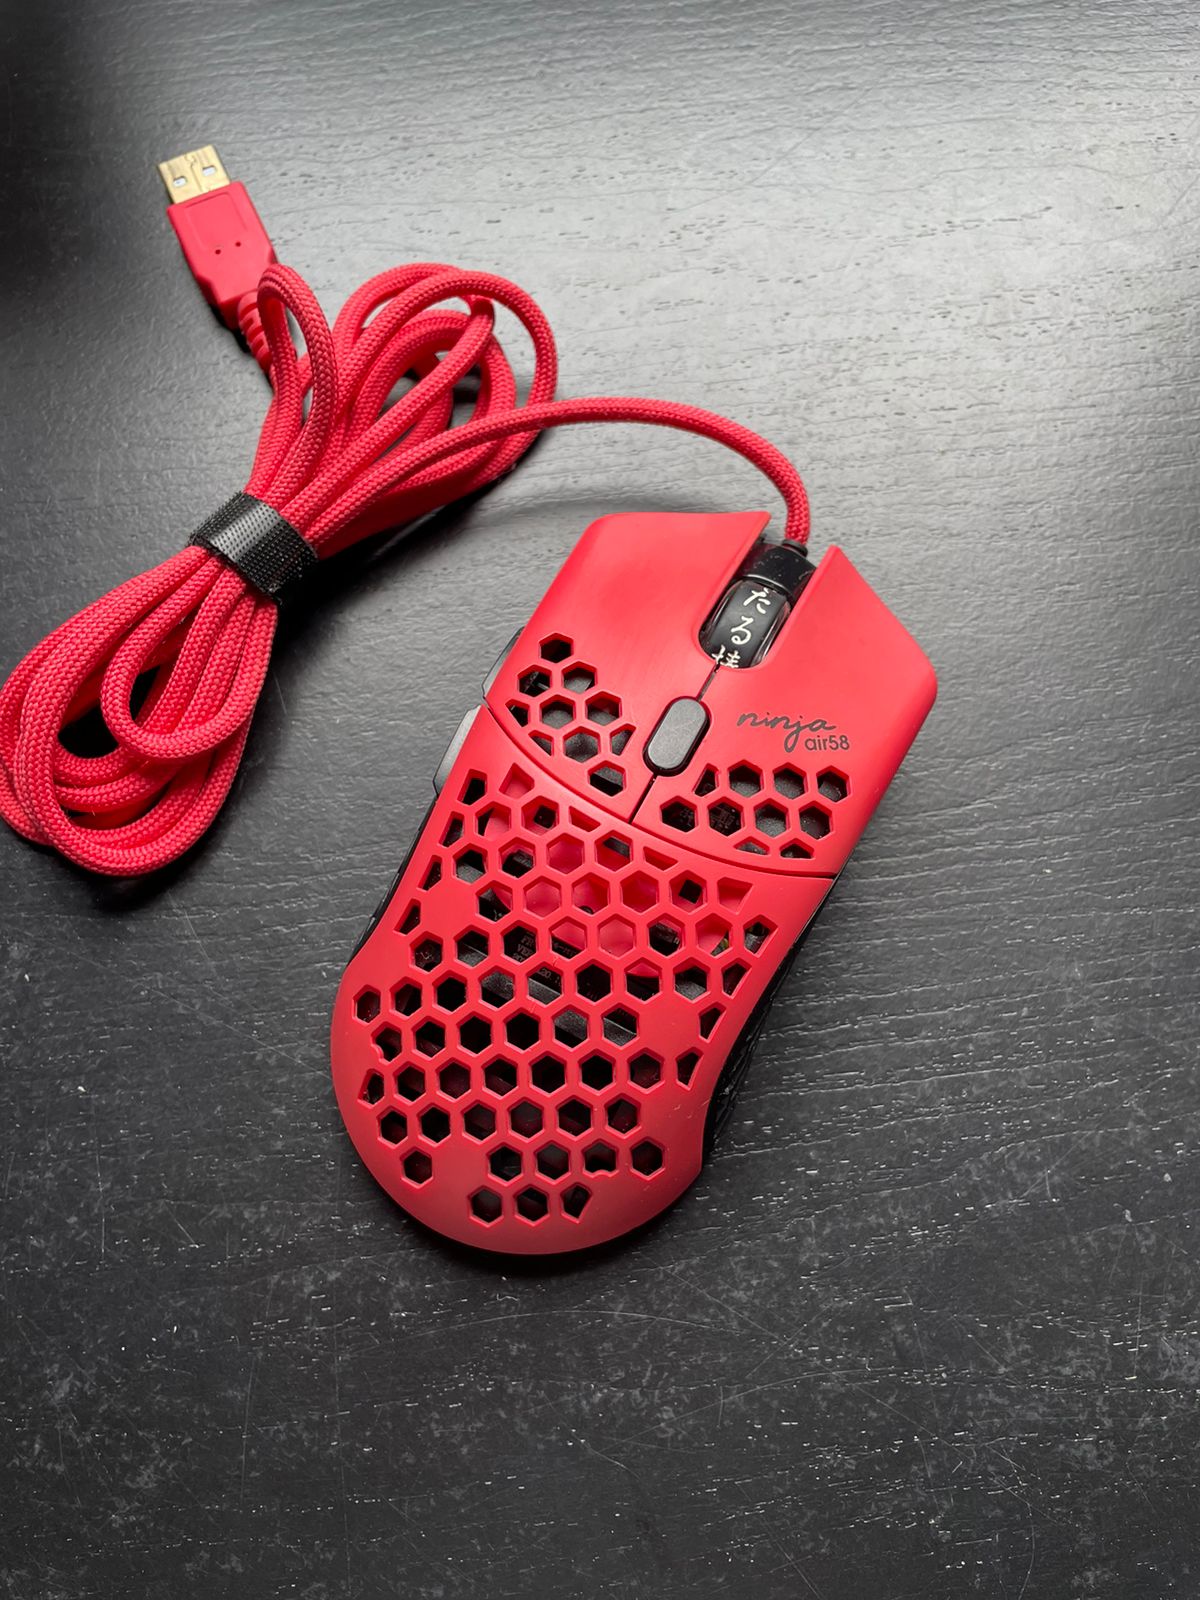 Mouse Finalmouse Ninja Air58-Red Cherry Blossom (OPEN BOX) - VTR Imports